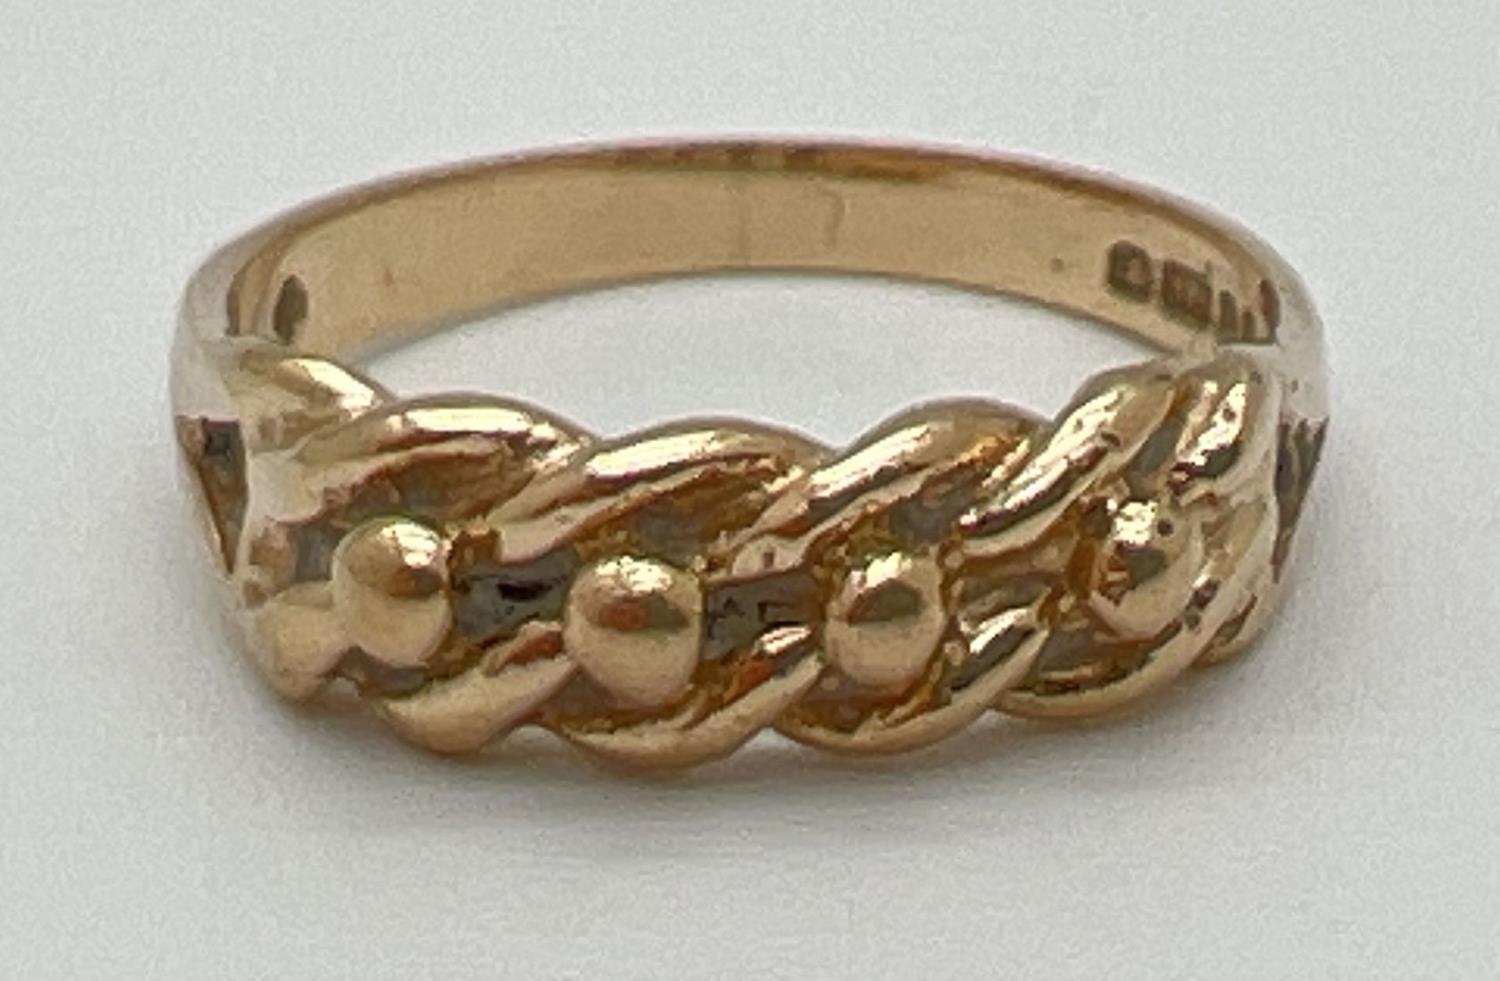 A vintage 9ct gold single row Keeper ring, fully hallmarked inside band. Ring size N. Total weight